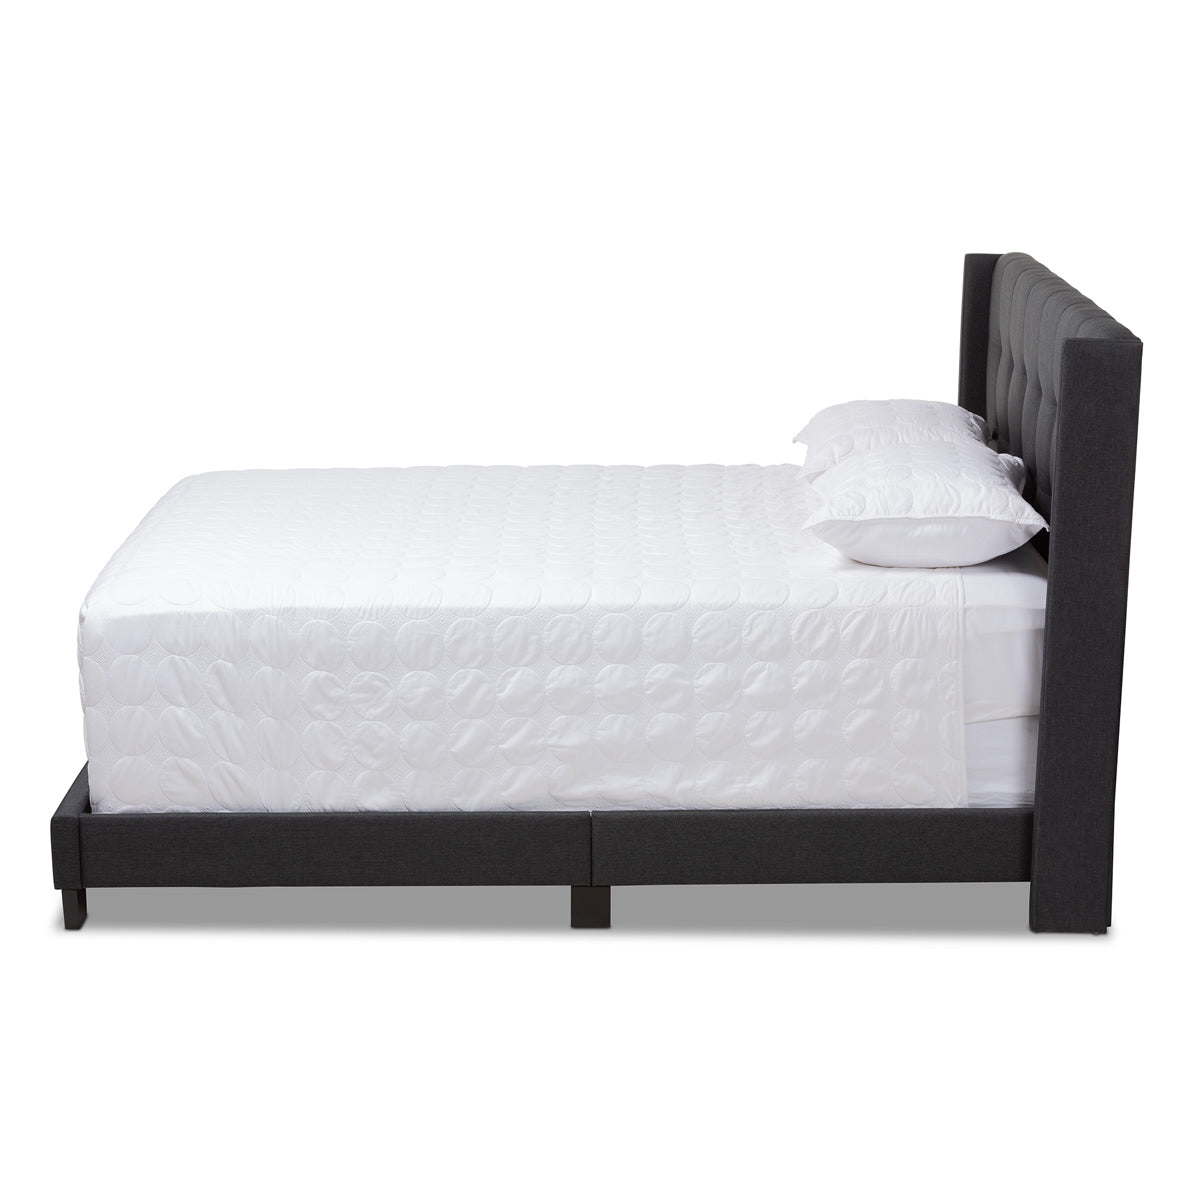 Baxton Studio Lisette Modern and Contemporary Charcoal Grey Fabric Upholstered King Size Bed Baxton Studio-0-Minimal And Modern - 3